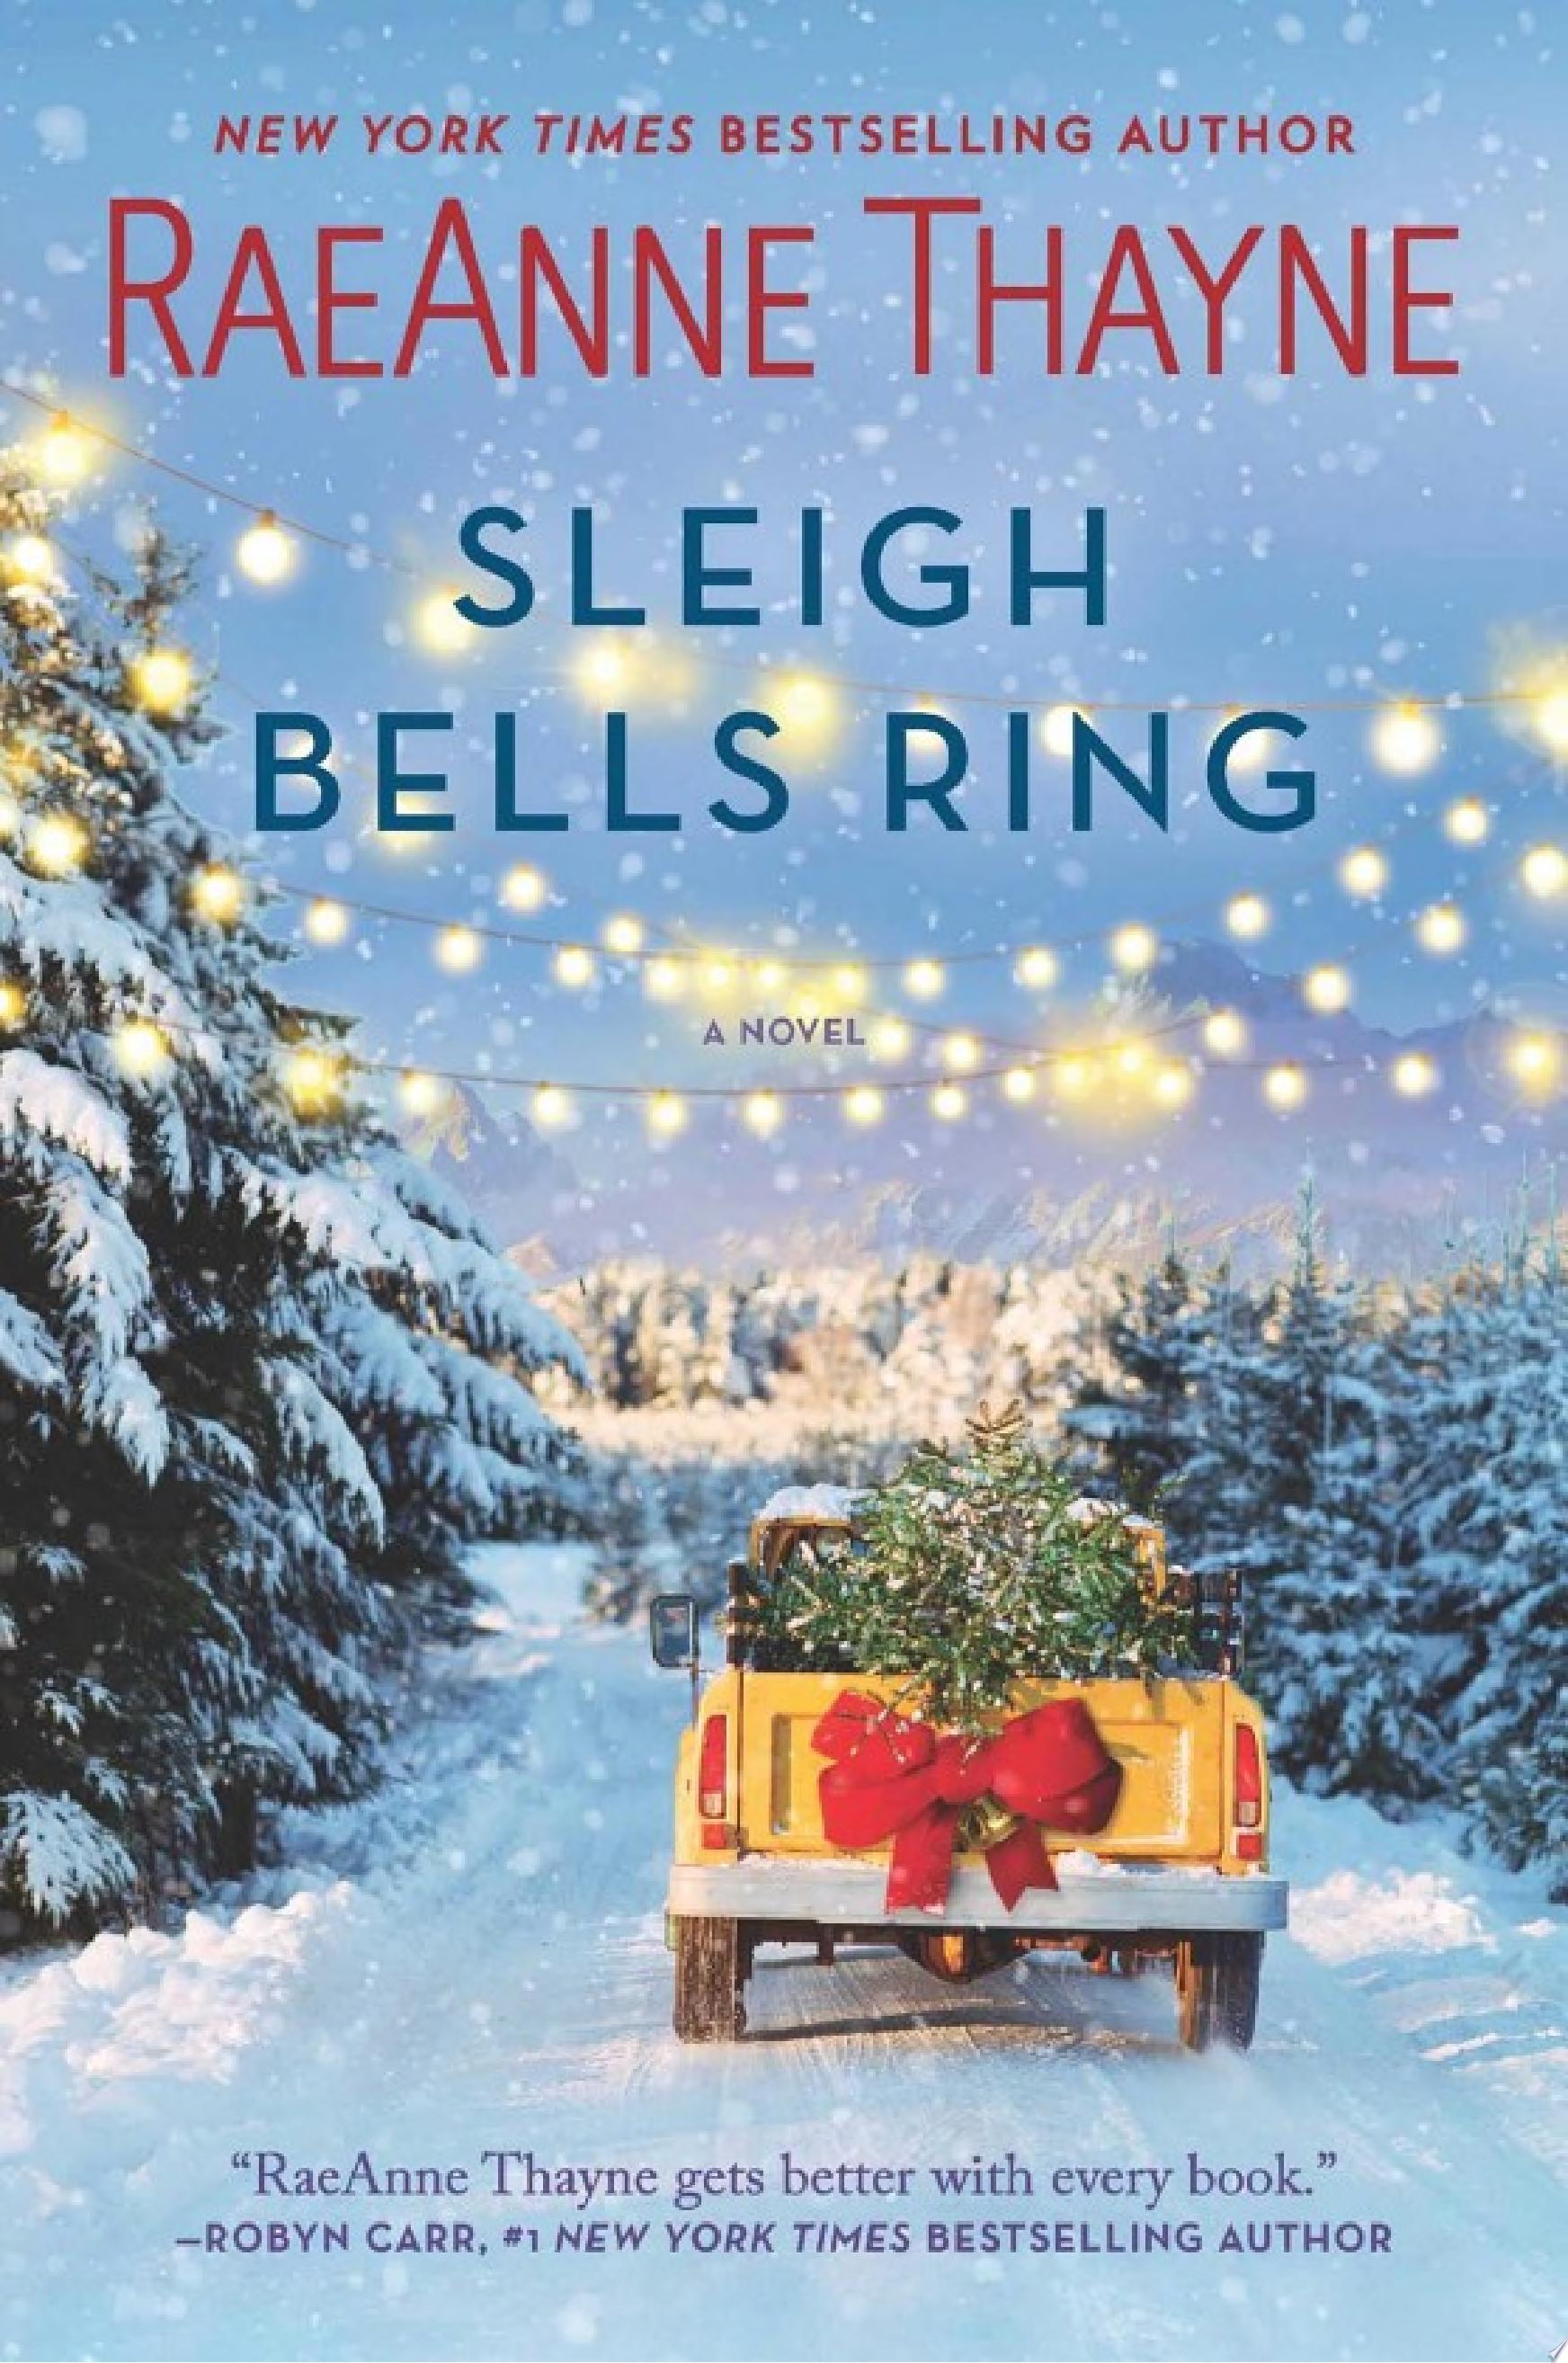 Image for "Sleigh Bells Ring"